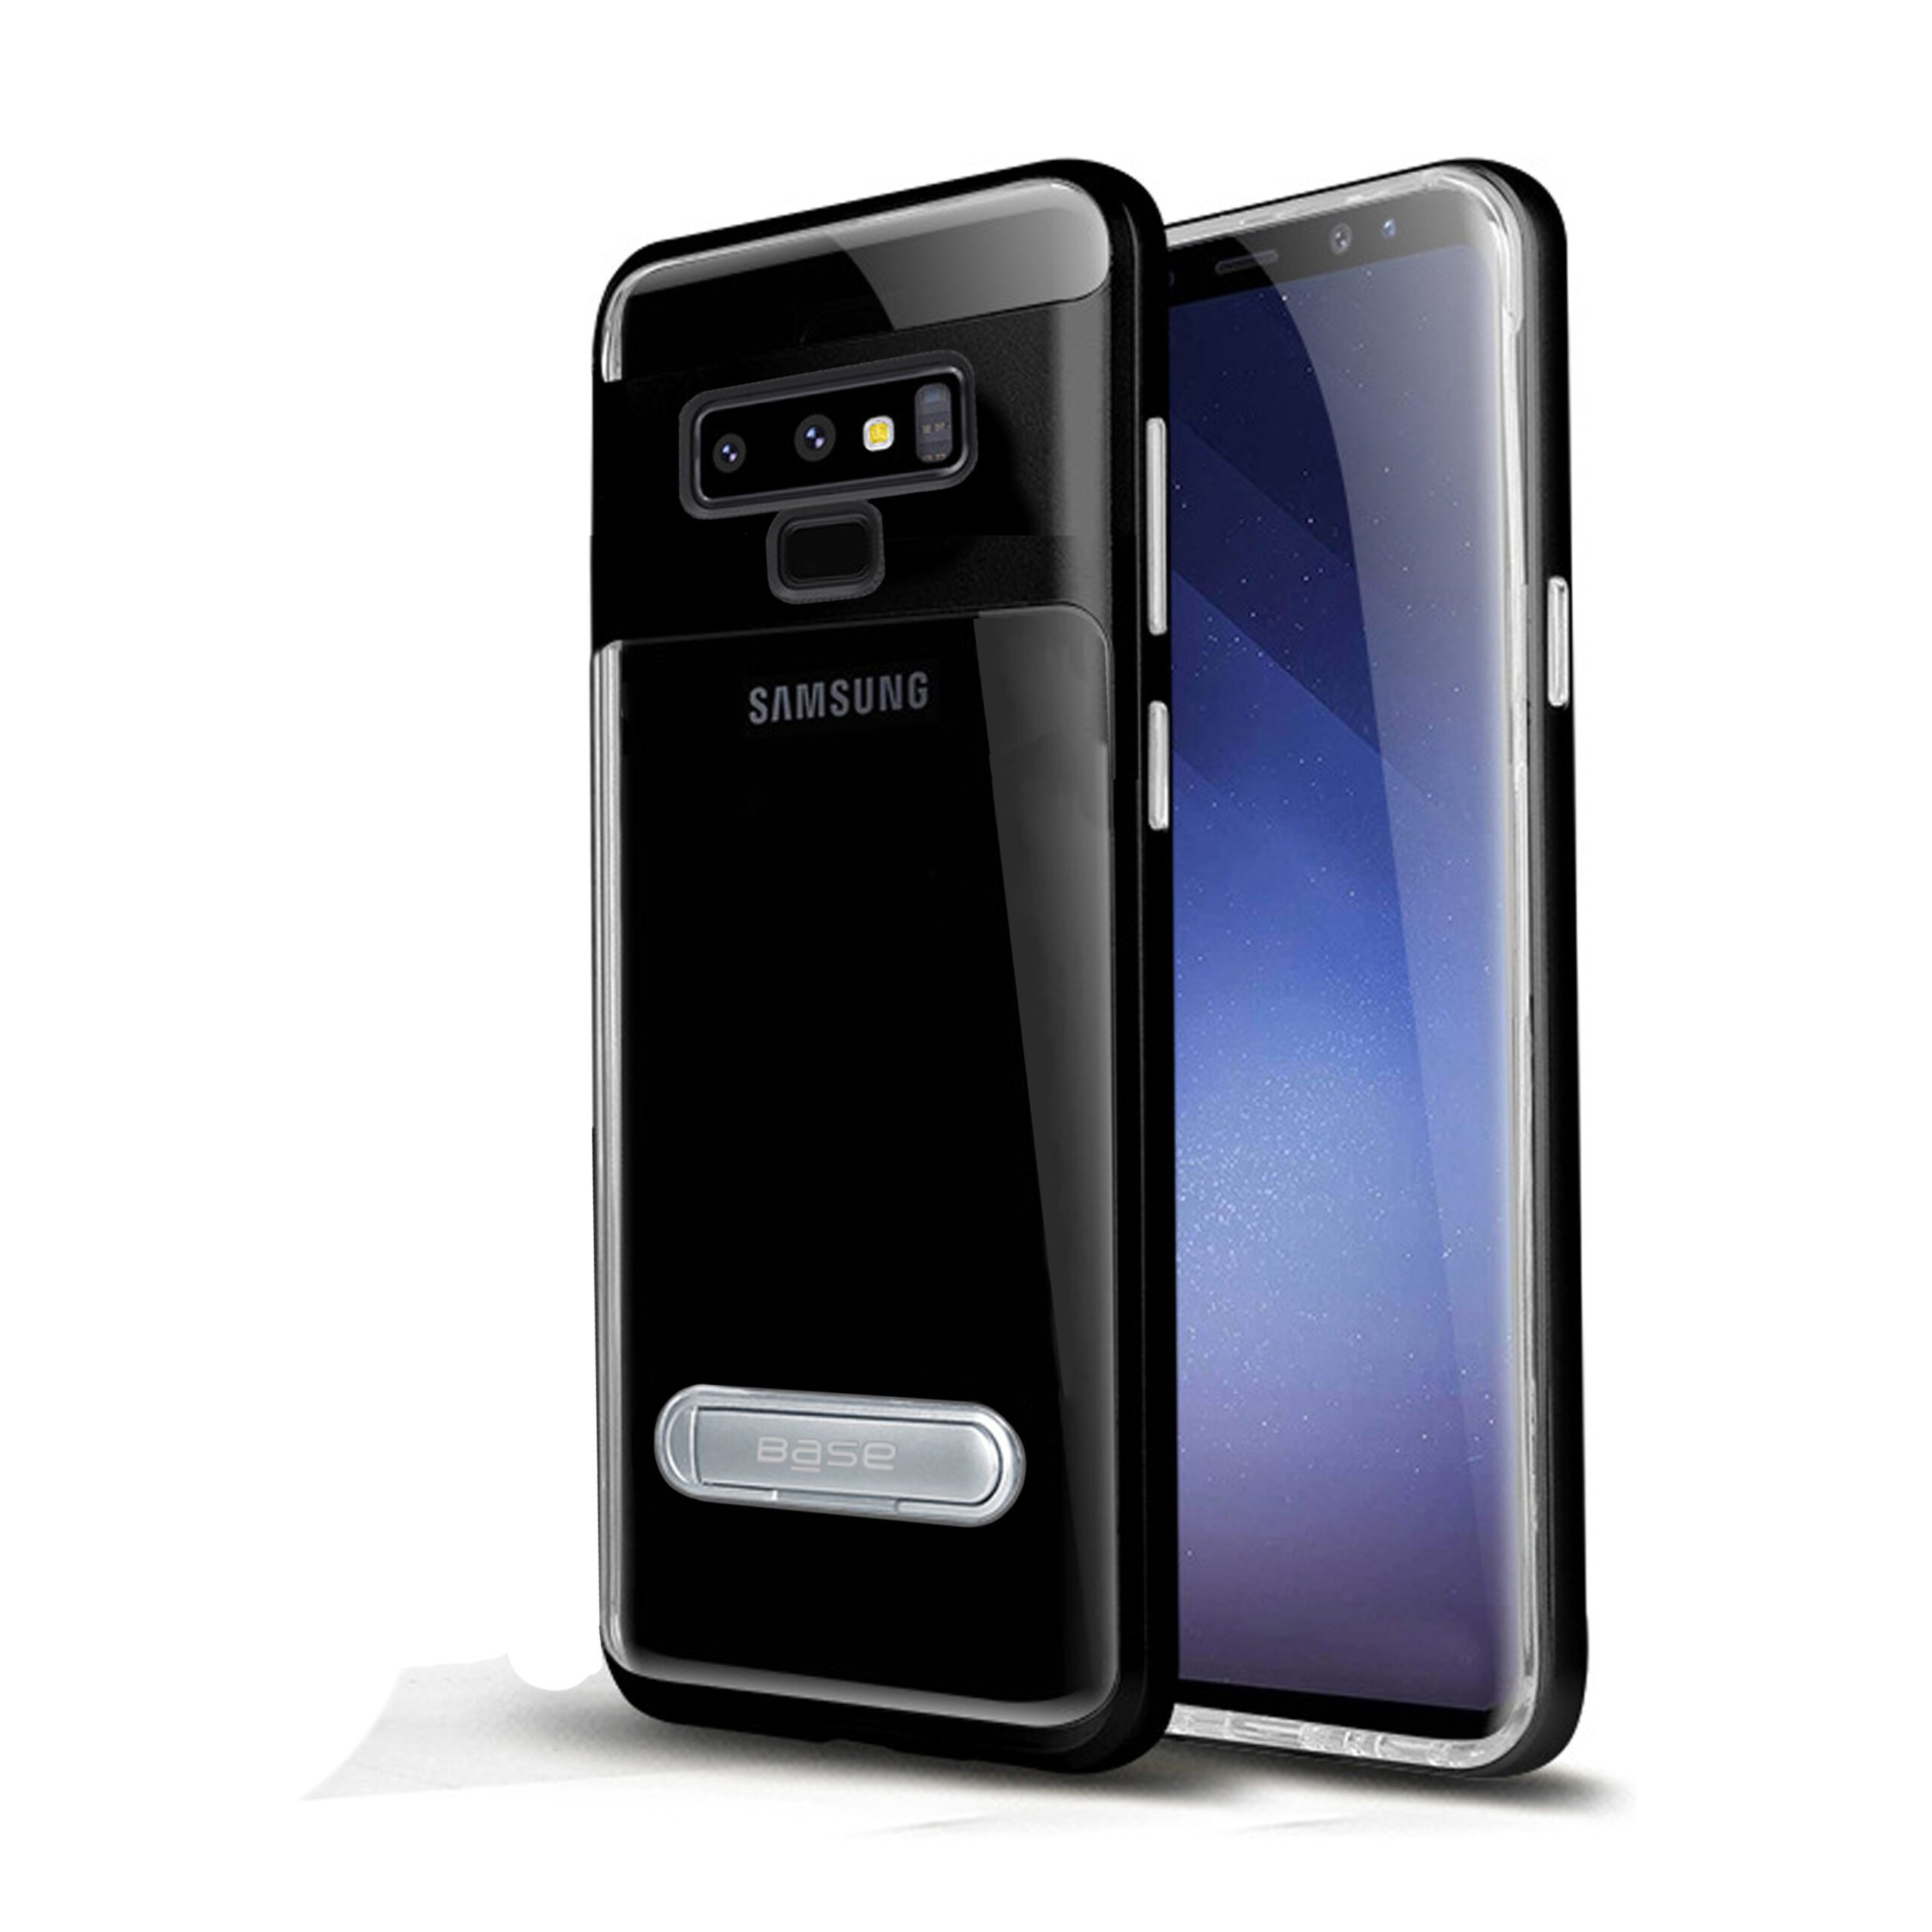 Base DuoHybrid - Reinforced  Protective Case w/ Kickstand for Samsung Note9 - Clear/Black